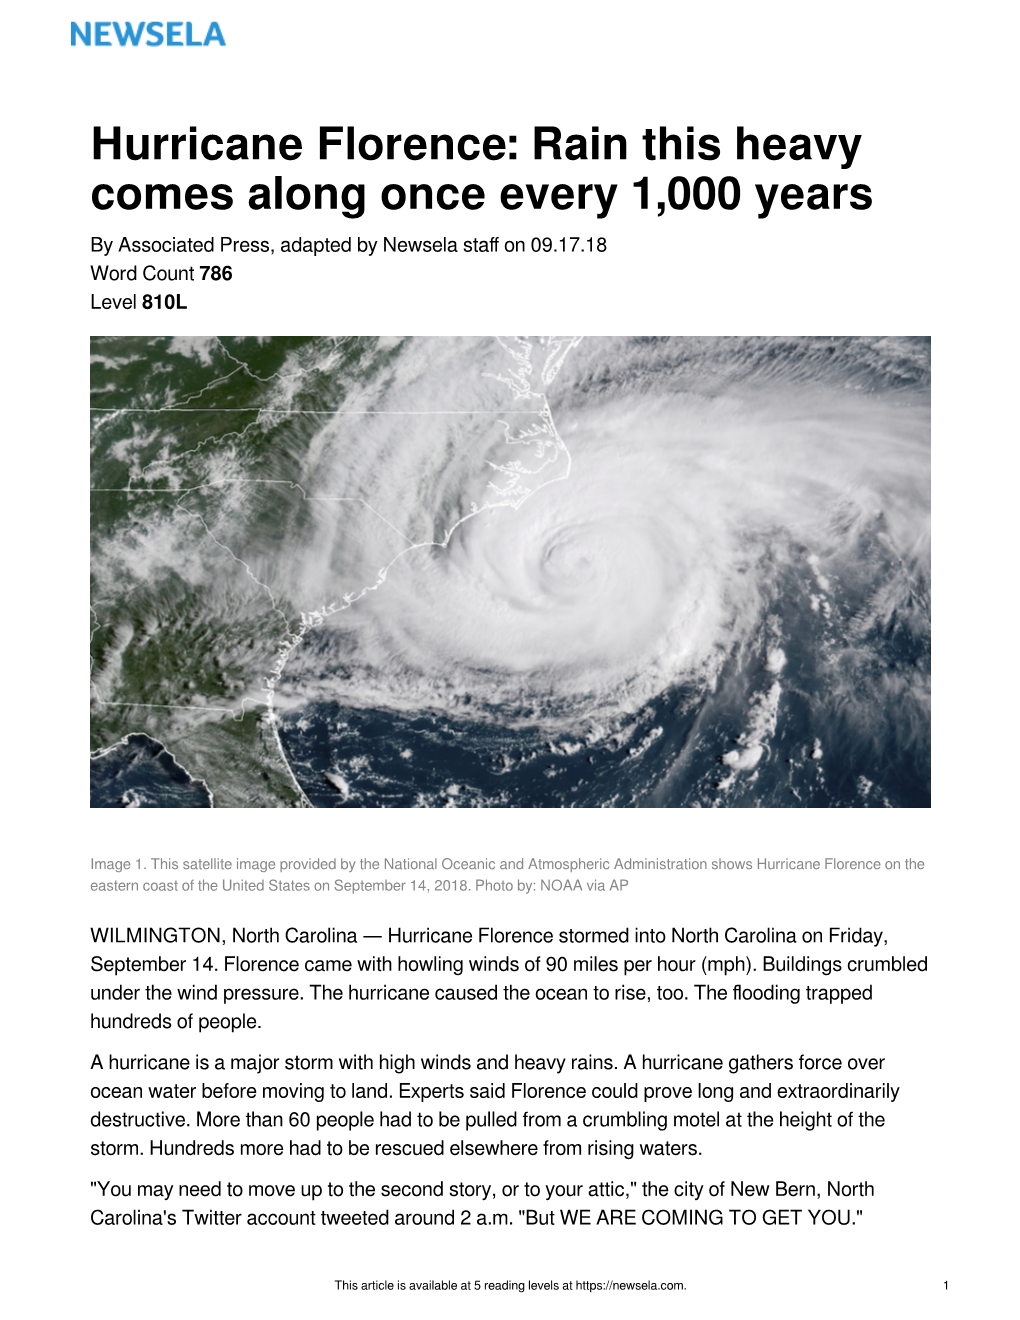 Hurricane Florence: Rain This Heavy Comes Along Once Every 1,000 Years by Associated Press, Adapted by Newsela Staﬀ on 09.17.18 Word Count 786 Level 810L